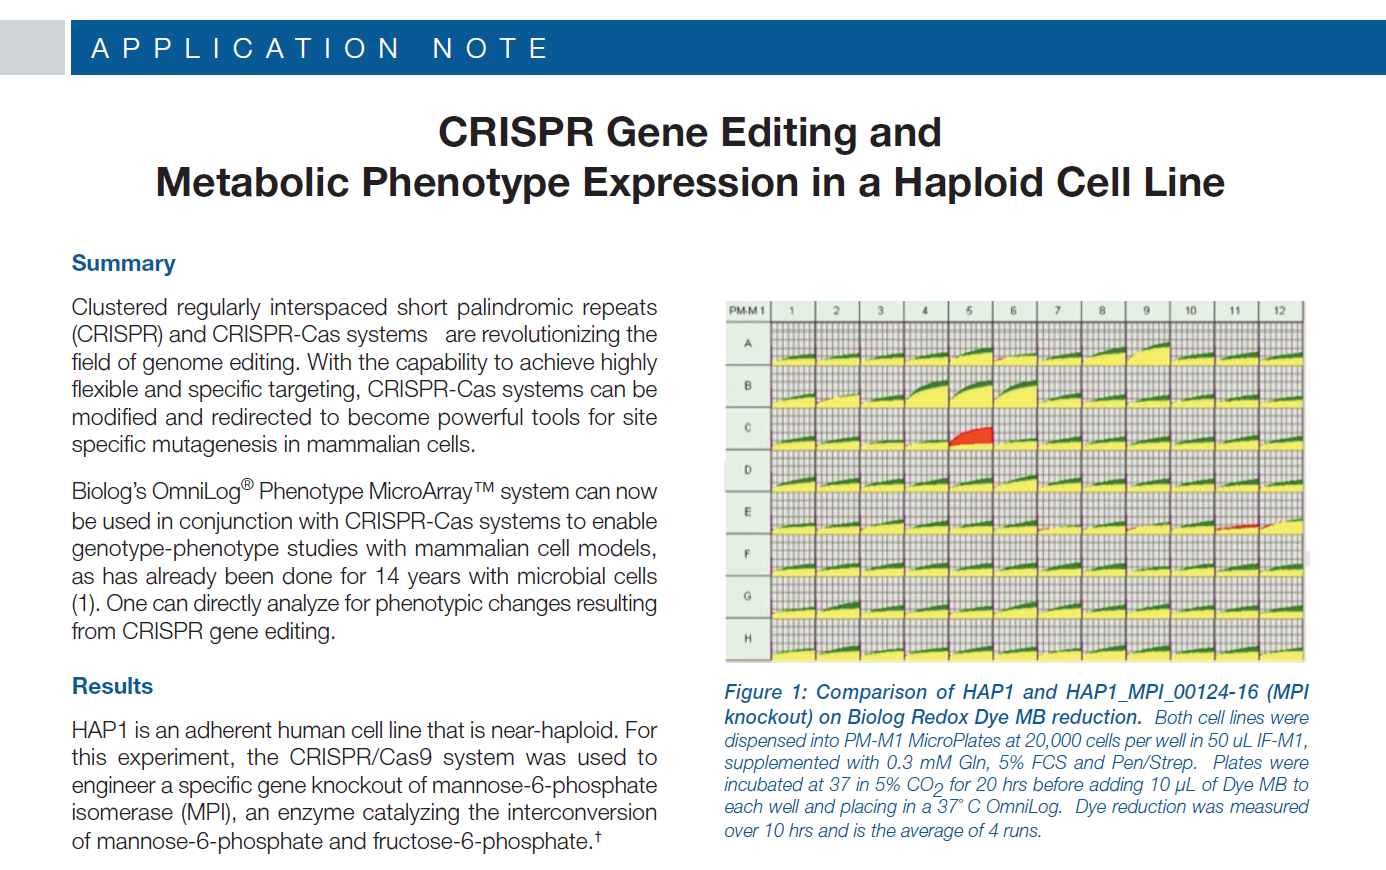 CRISPR Gene Editing and Metabolic Phenotype Expression in a Haploid Cell Line_1.PNG